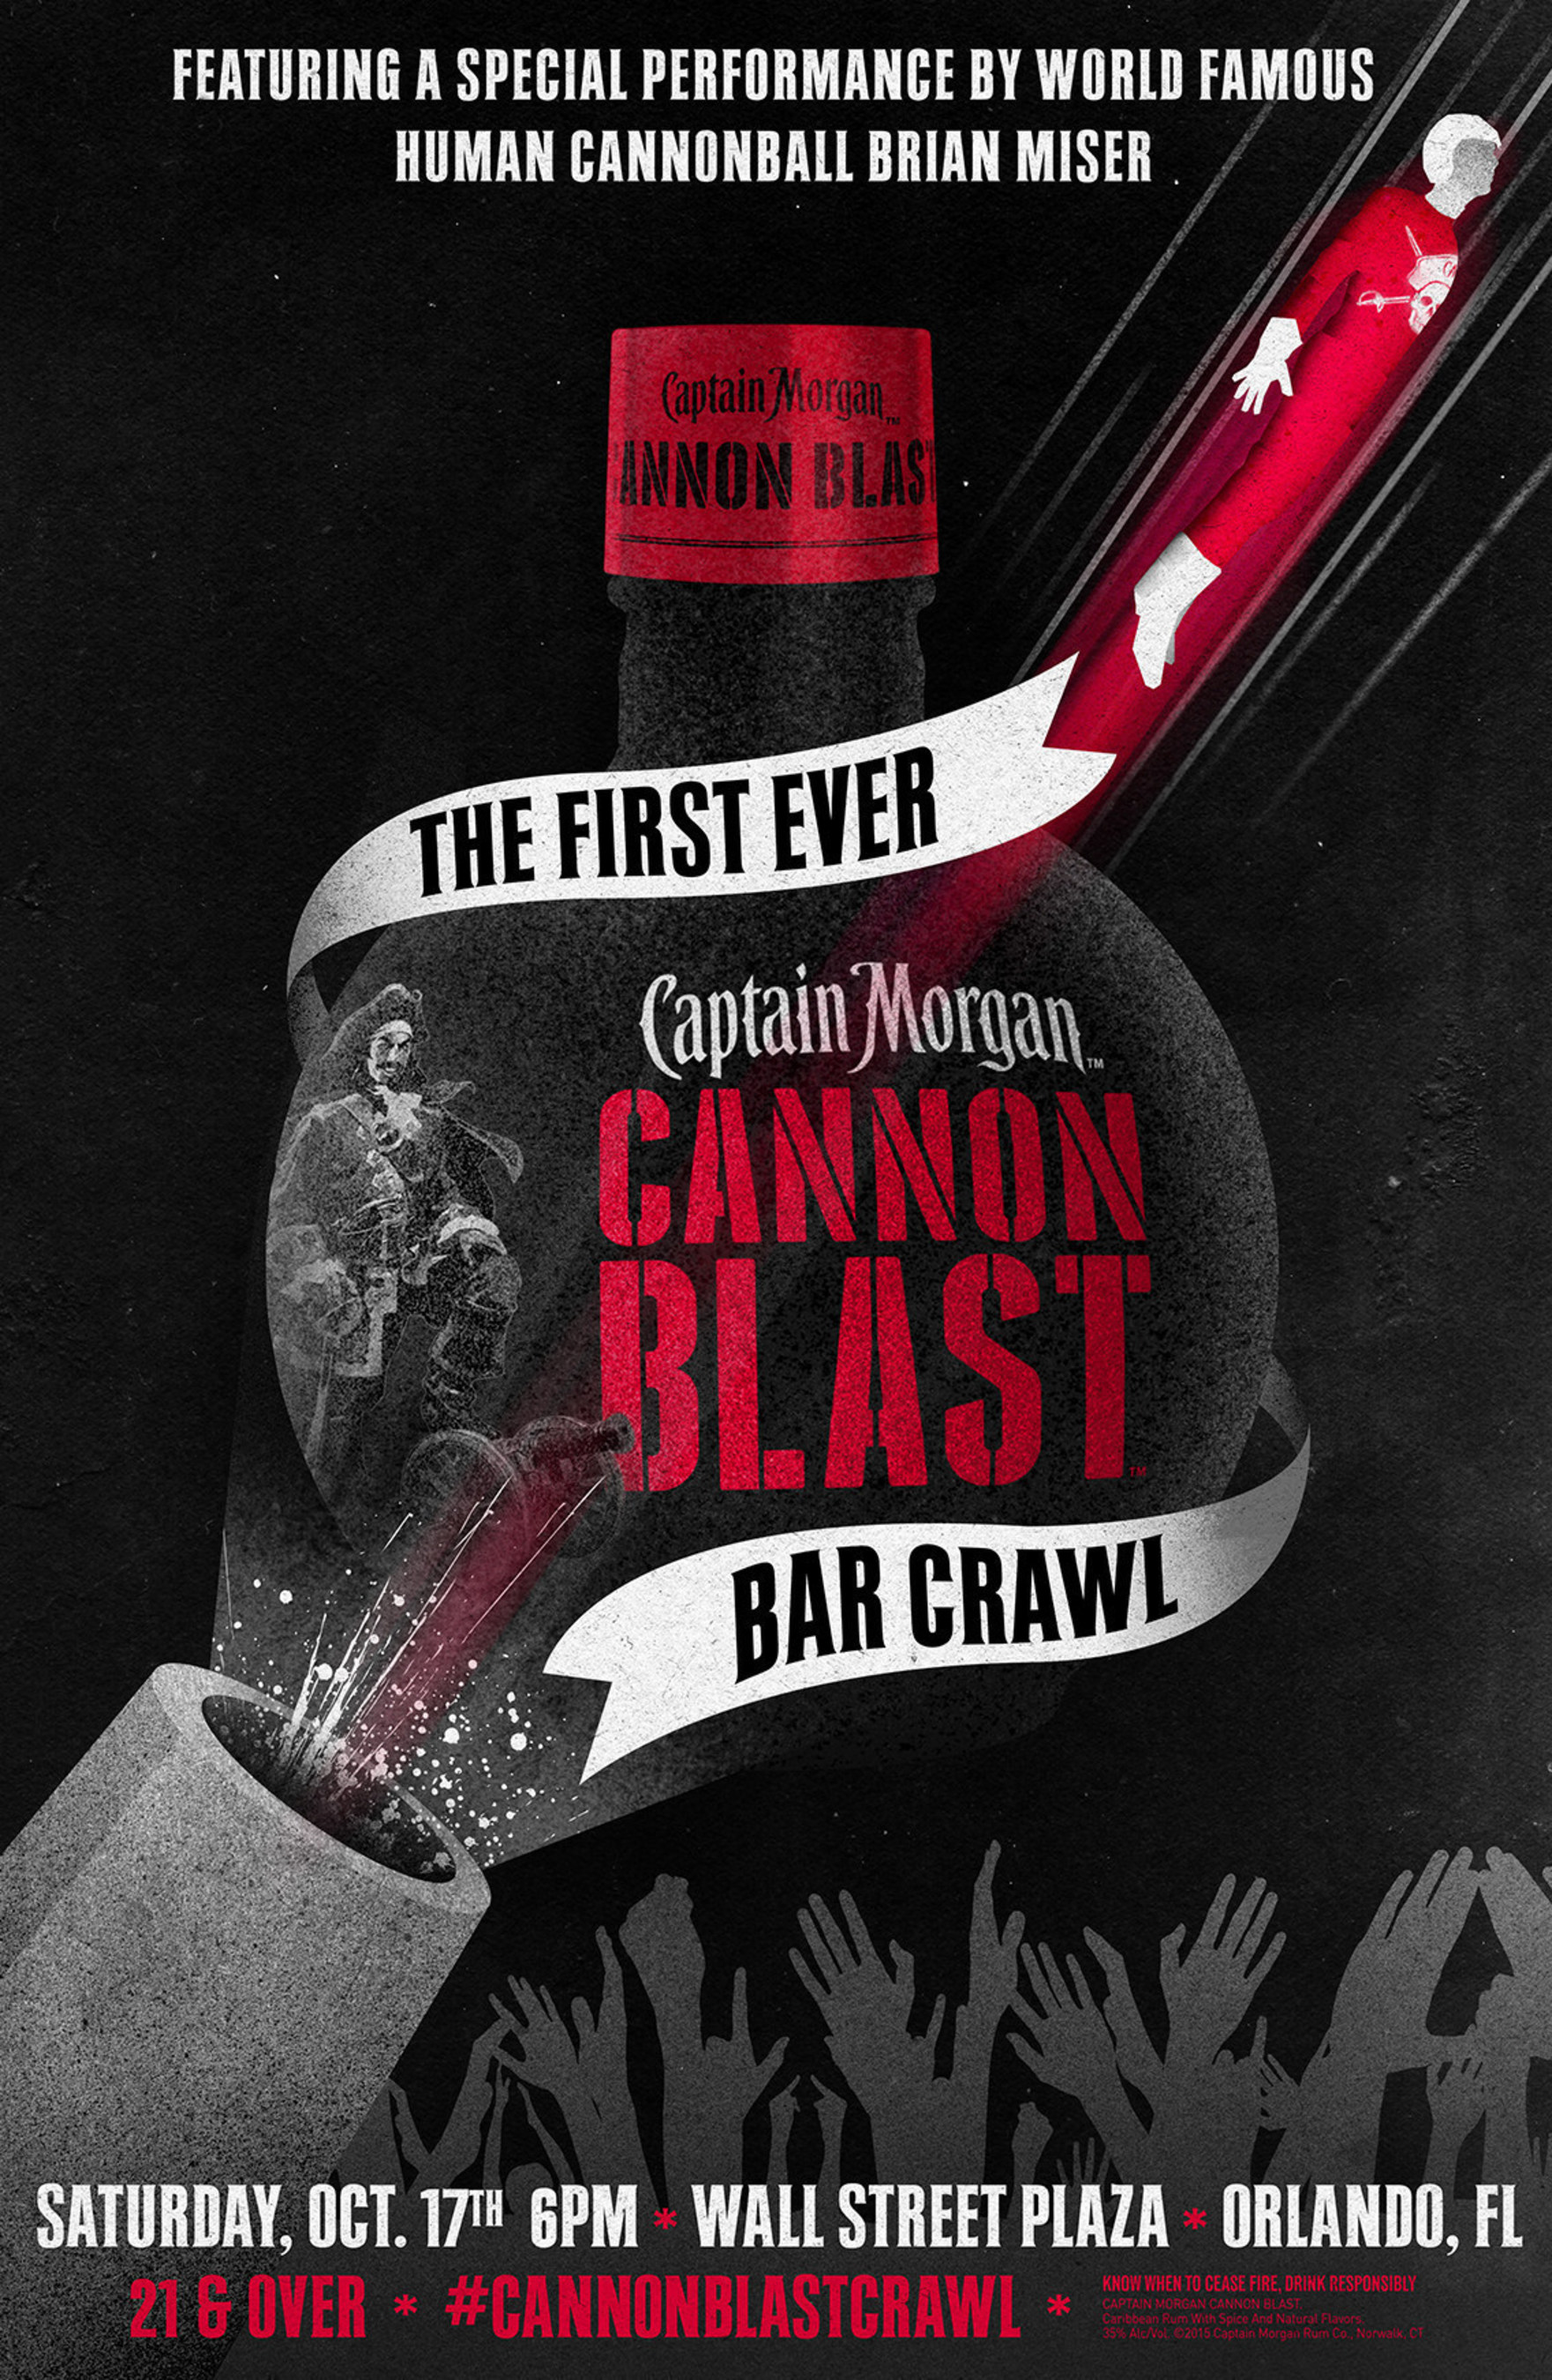 Captain Morgan launches Captain Morgan Cannon Blast, the brand's newest shot innovation, with epic Cannon Blast Bar Crawl featuring a human cannonball shot between multiple bars in Orlando, Fla.